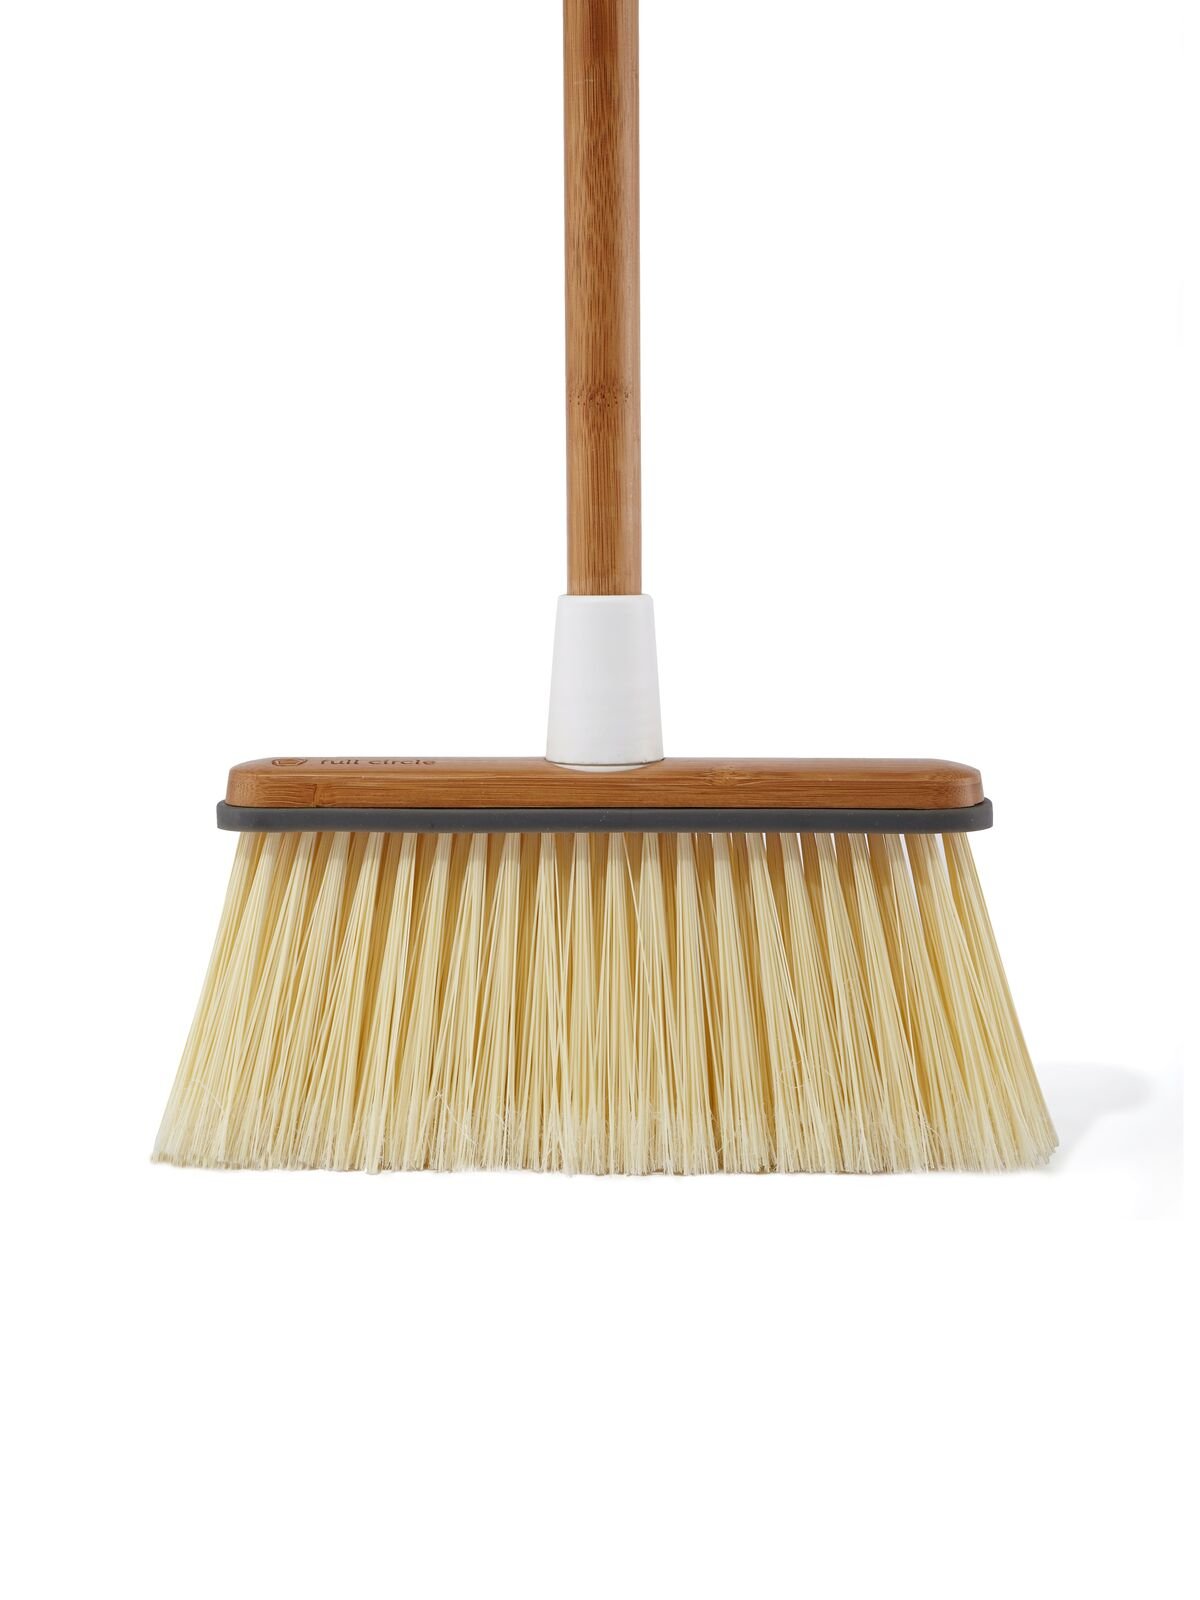 Full Circle Sweep Home Cleaning, Broom, White